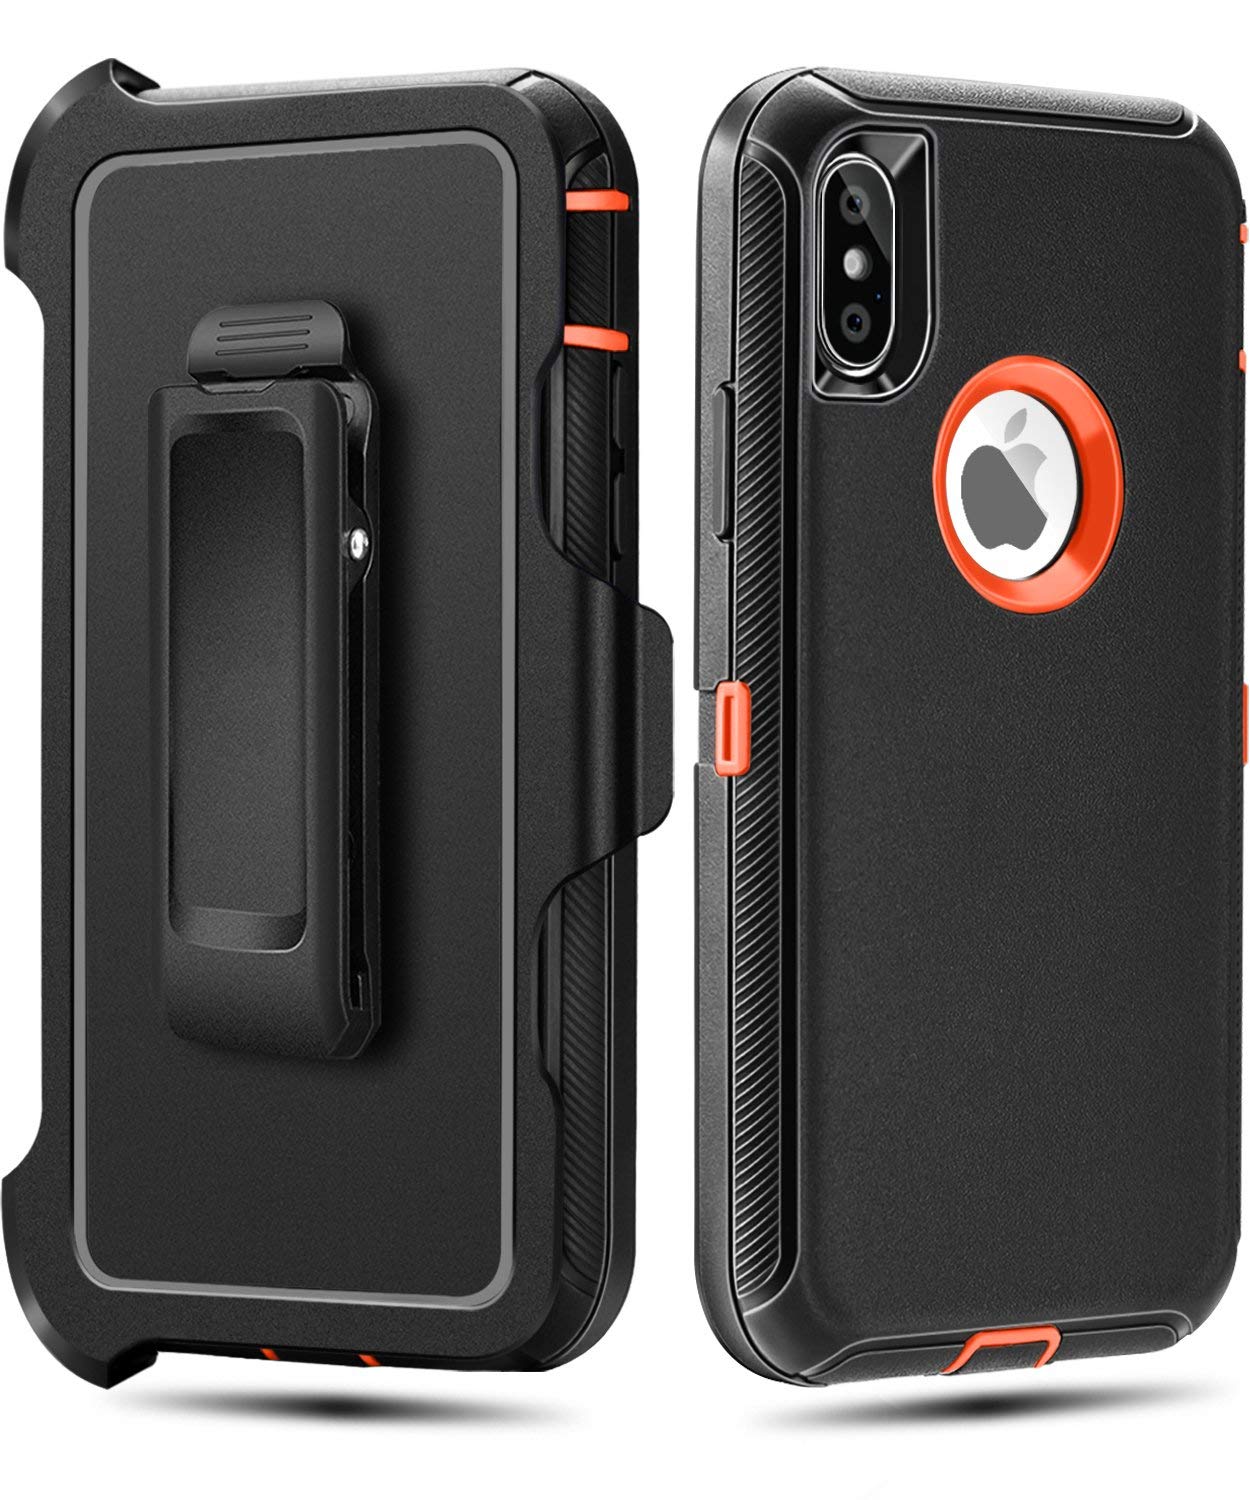 iPhone XS,iPhone X Case,FOGEEK Belt Clip Holster Heavy Duty Kickstand Cover [Support Wireless Charging] [Dust-Proof] [Shockproof] Compatible for Apple iPhone XS, iPhone X, 5.8 inch (Black and Orange)